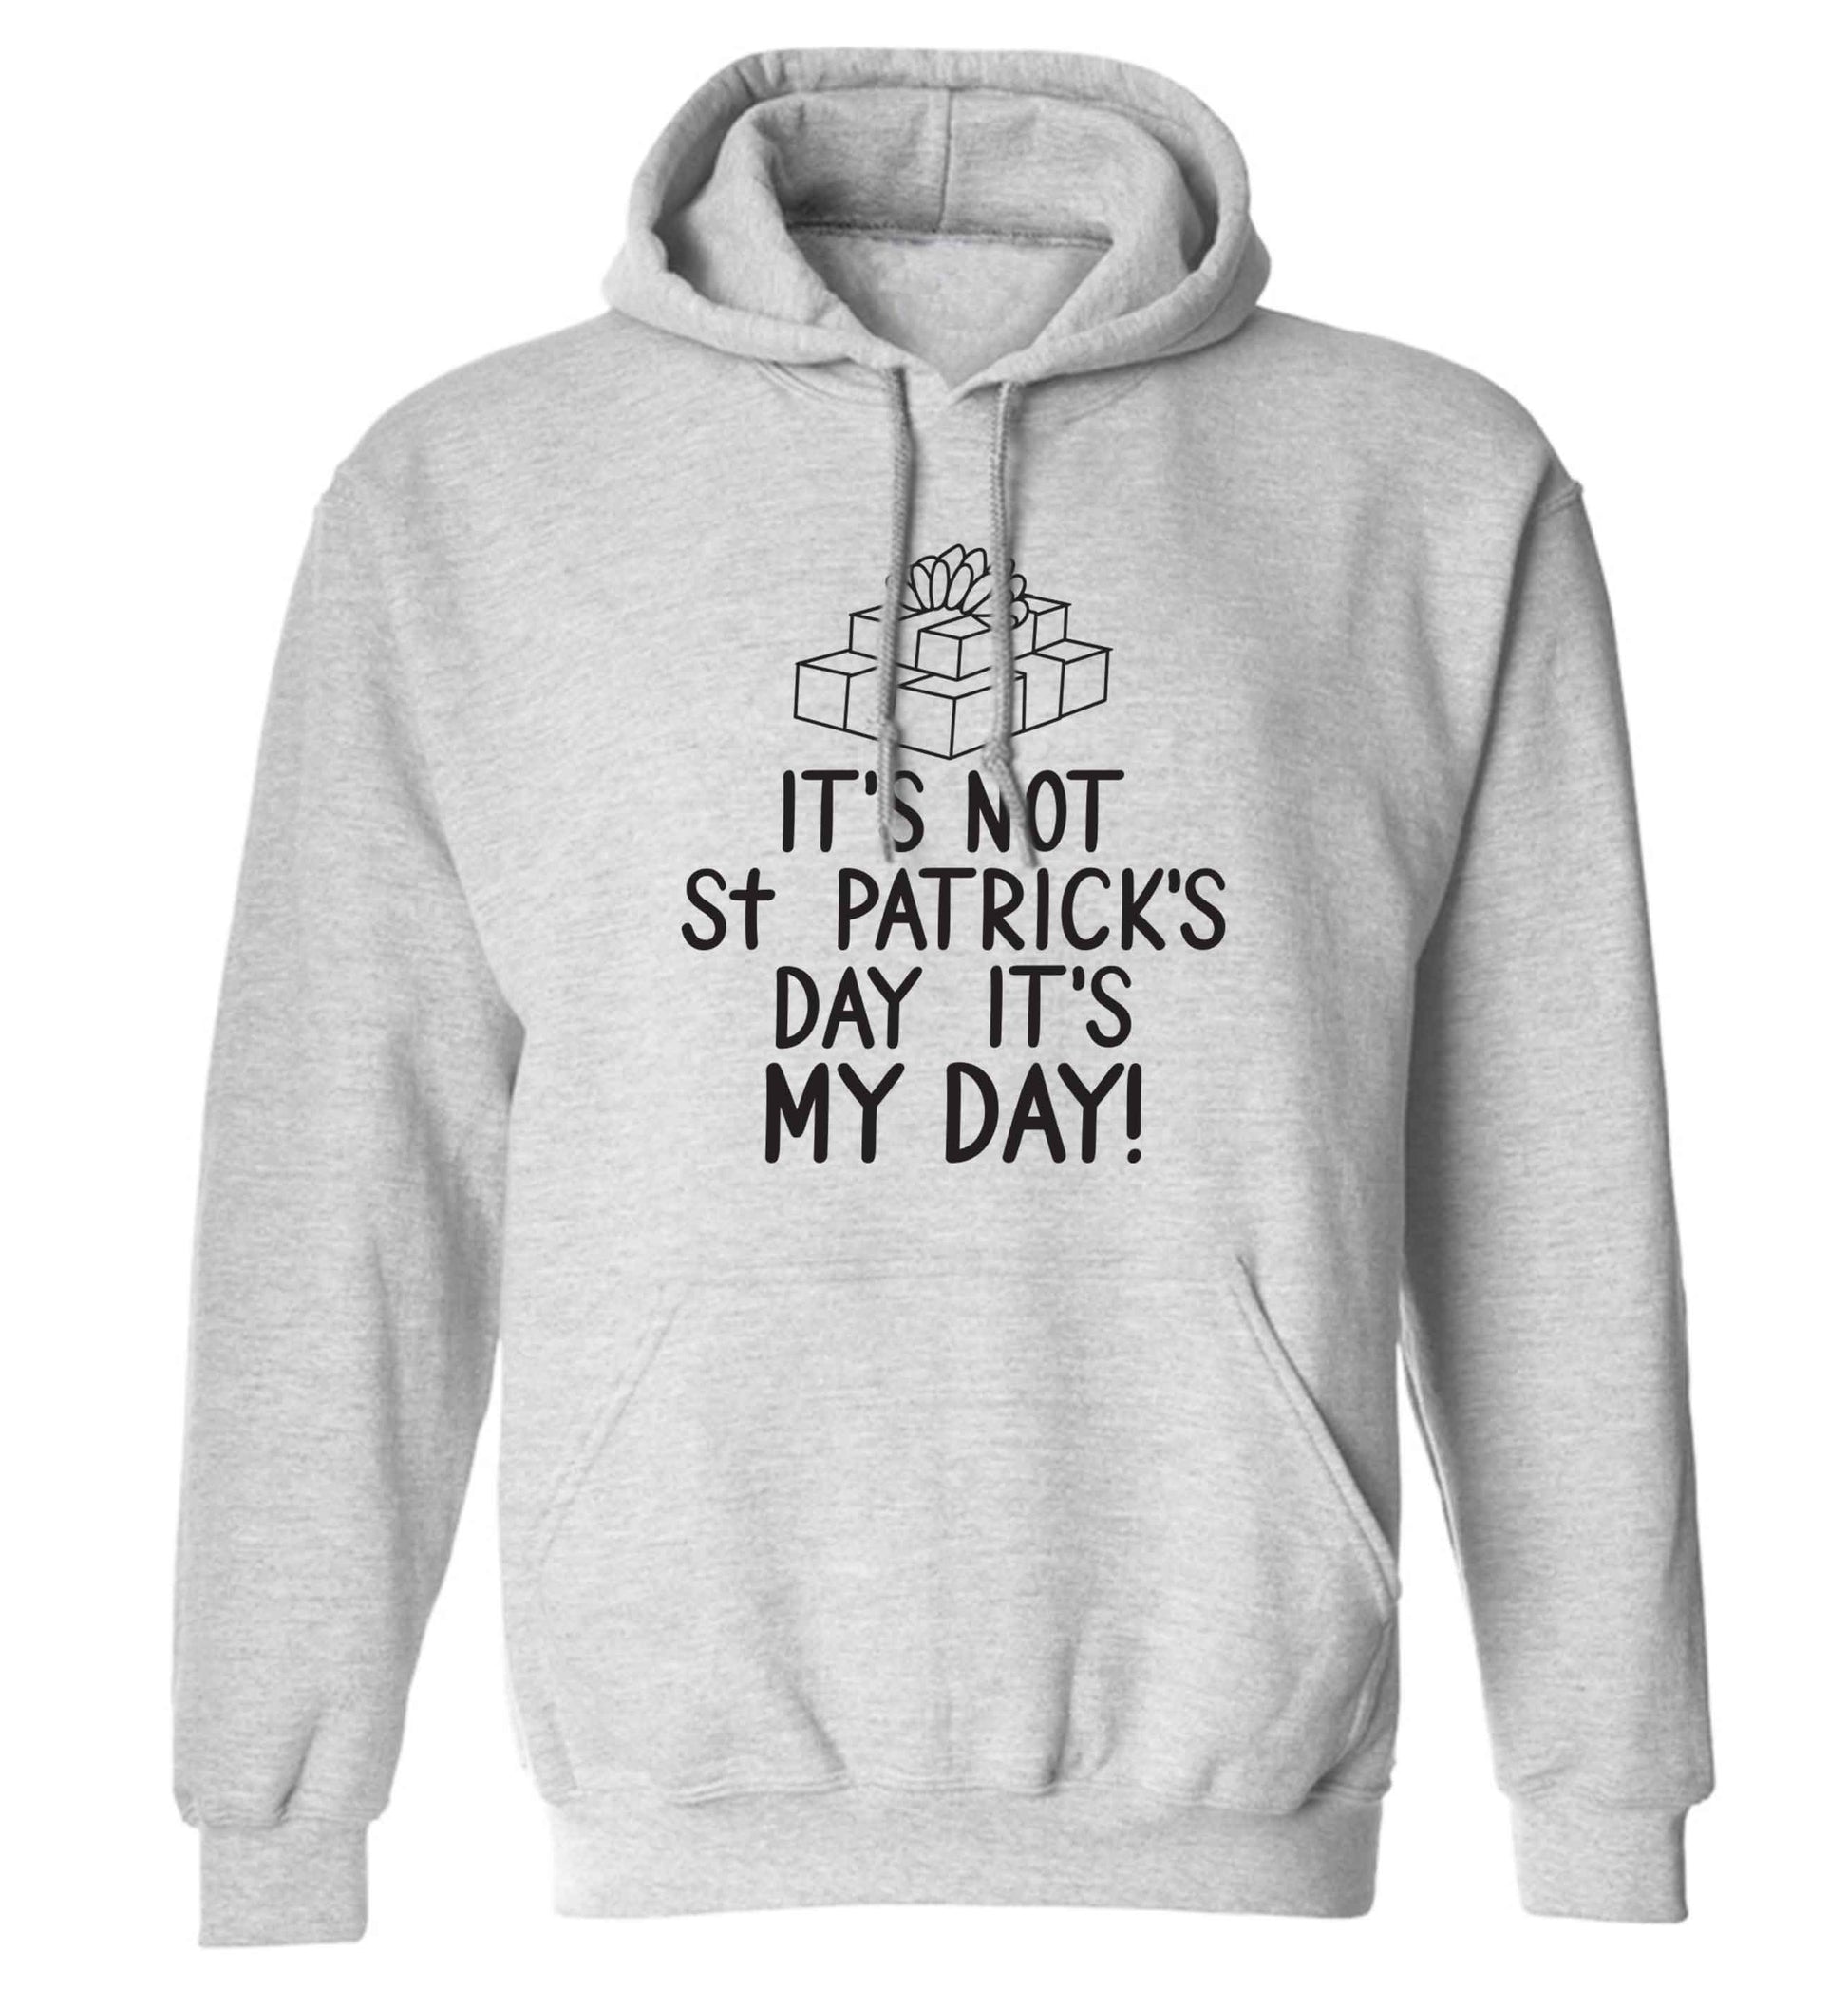 Funny gifts for your mum on mother's dayor her birthday! It's not St Patricks day it's my day adults unisex grey hoodie 2XL